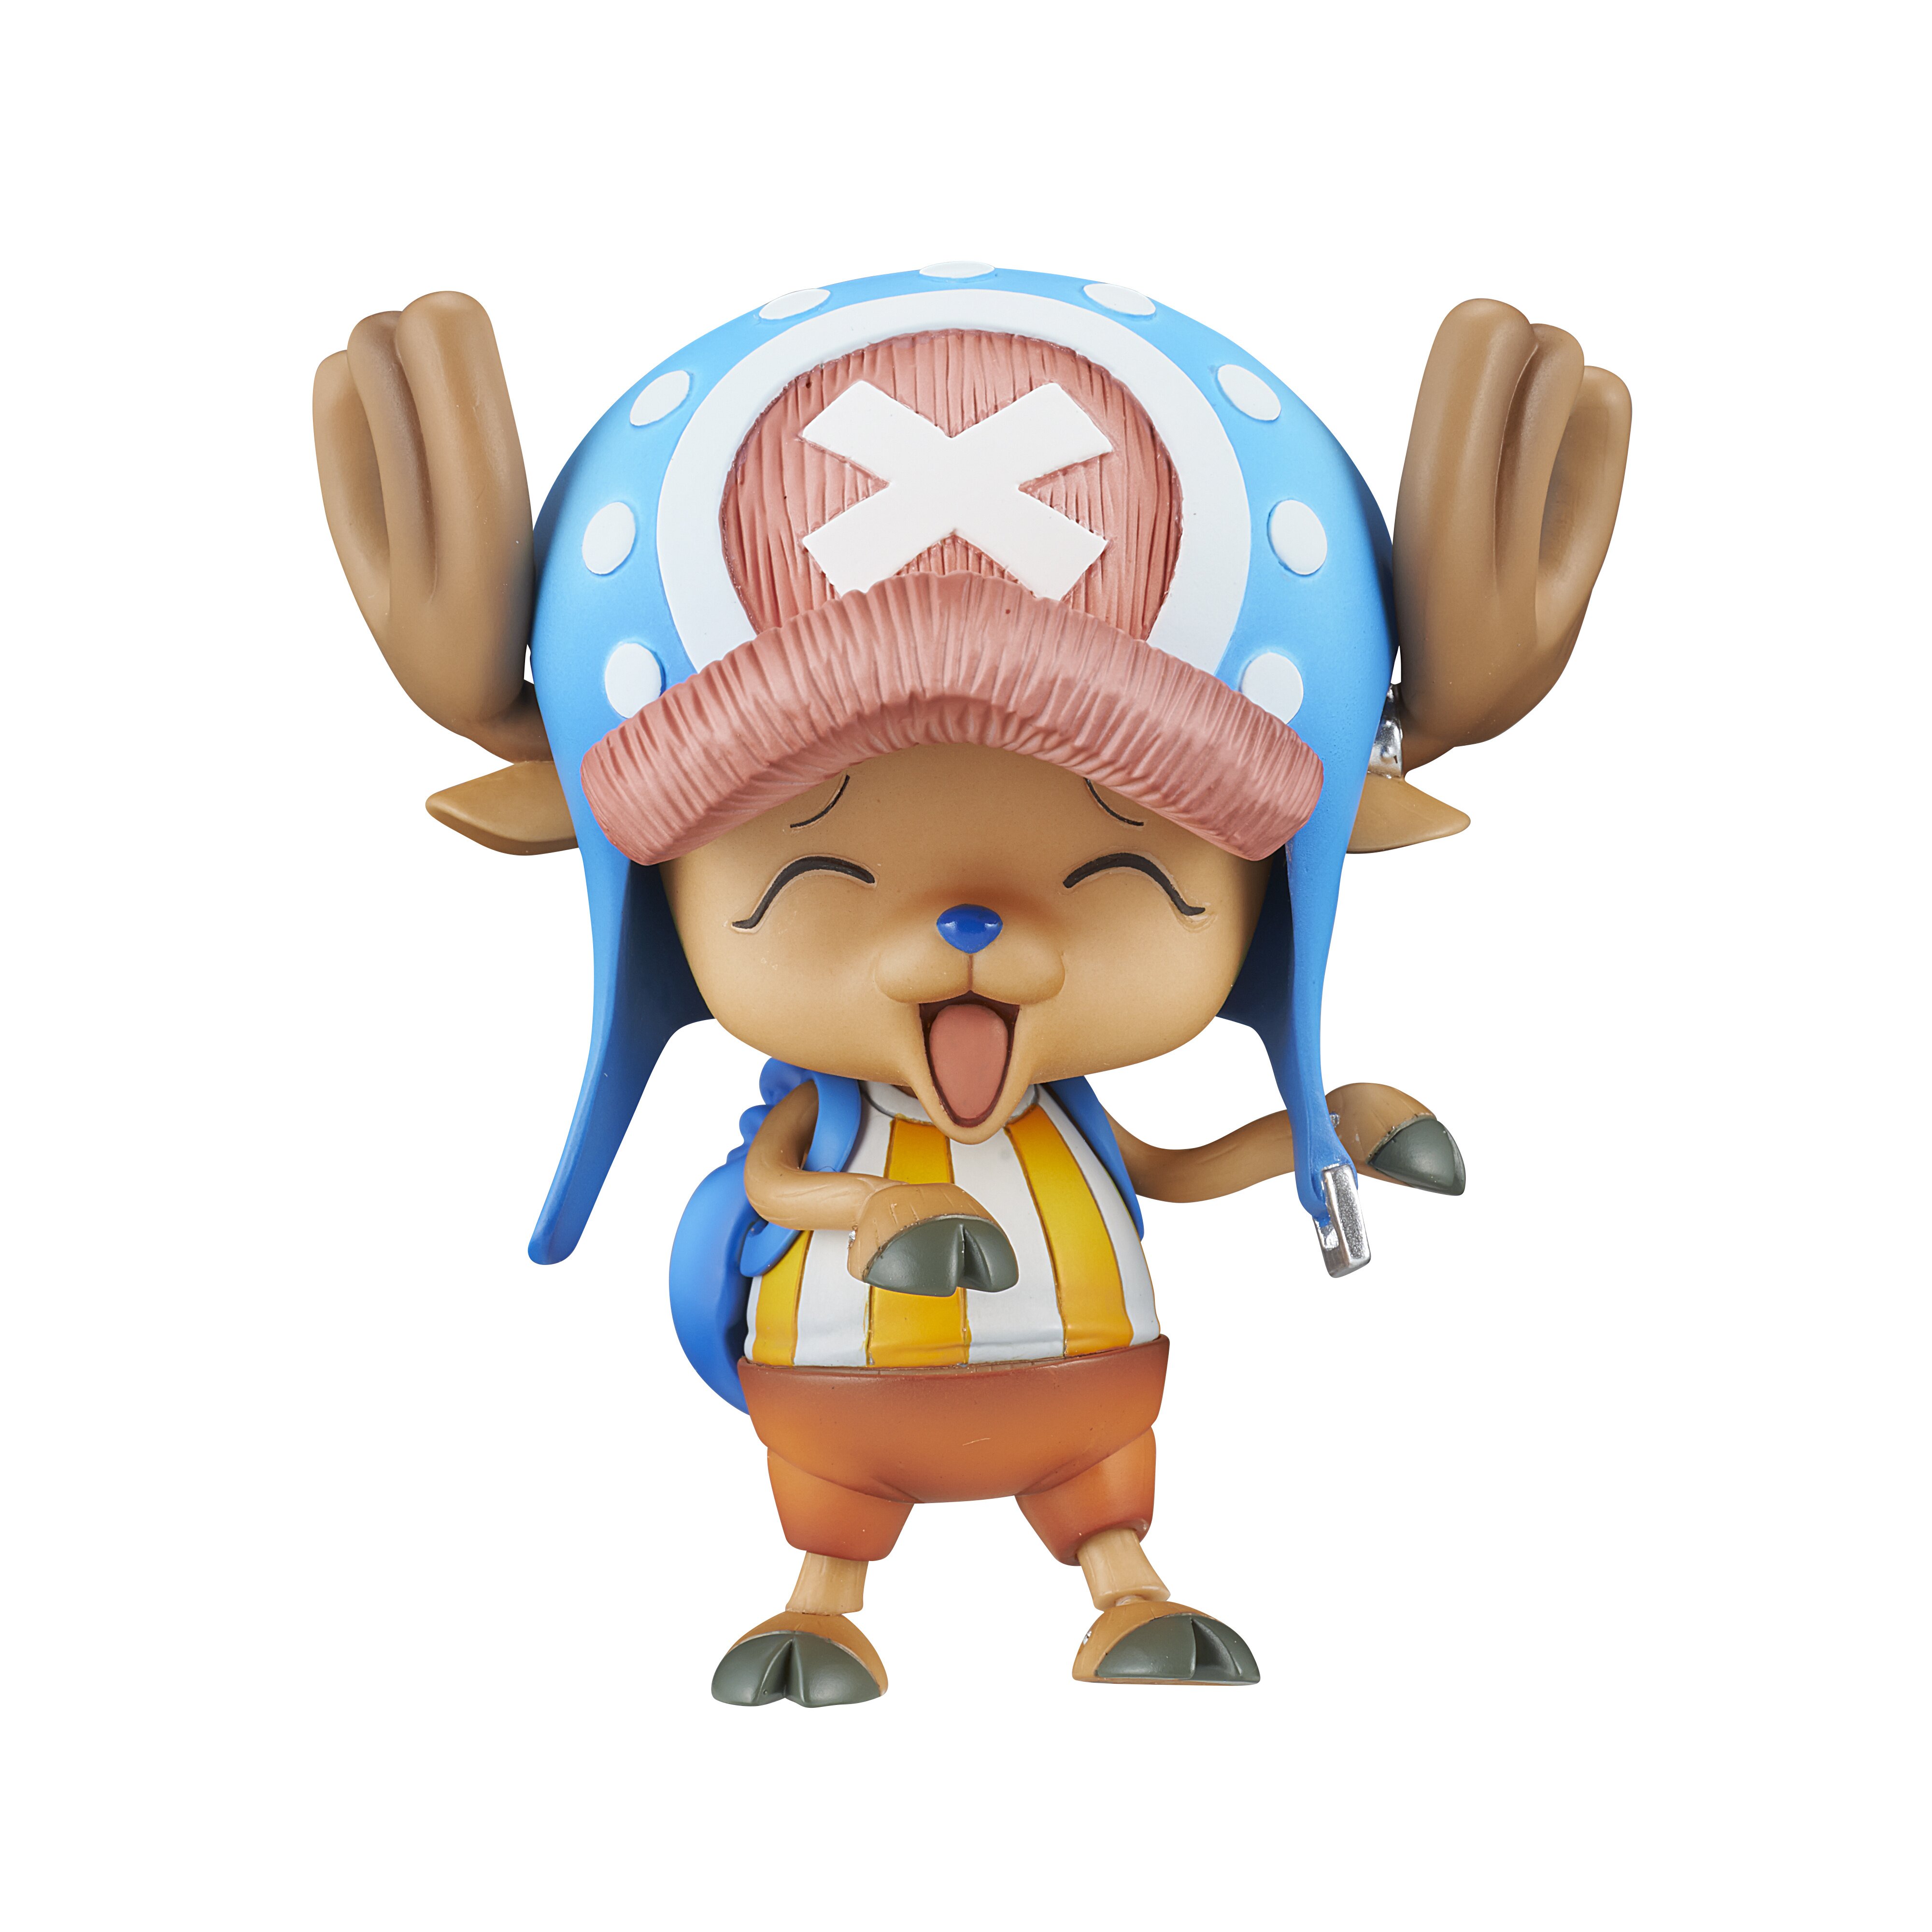 ONE PIECE Tony Tony Chopper violent mode monster strengthening Chopper  figure boxed model: Buy Online at Best Price in UAE 